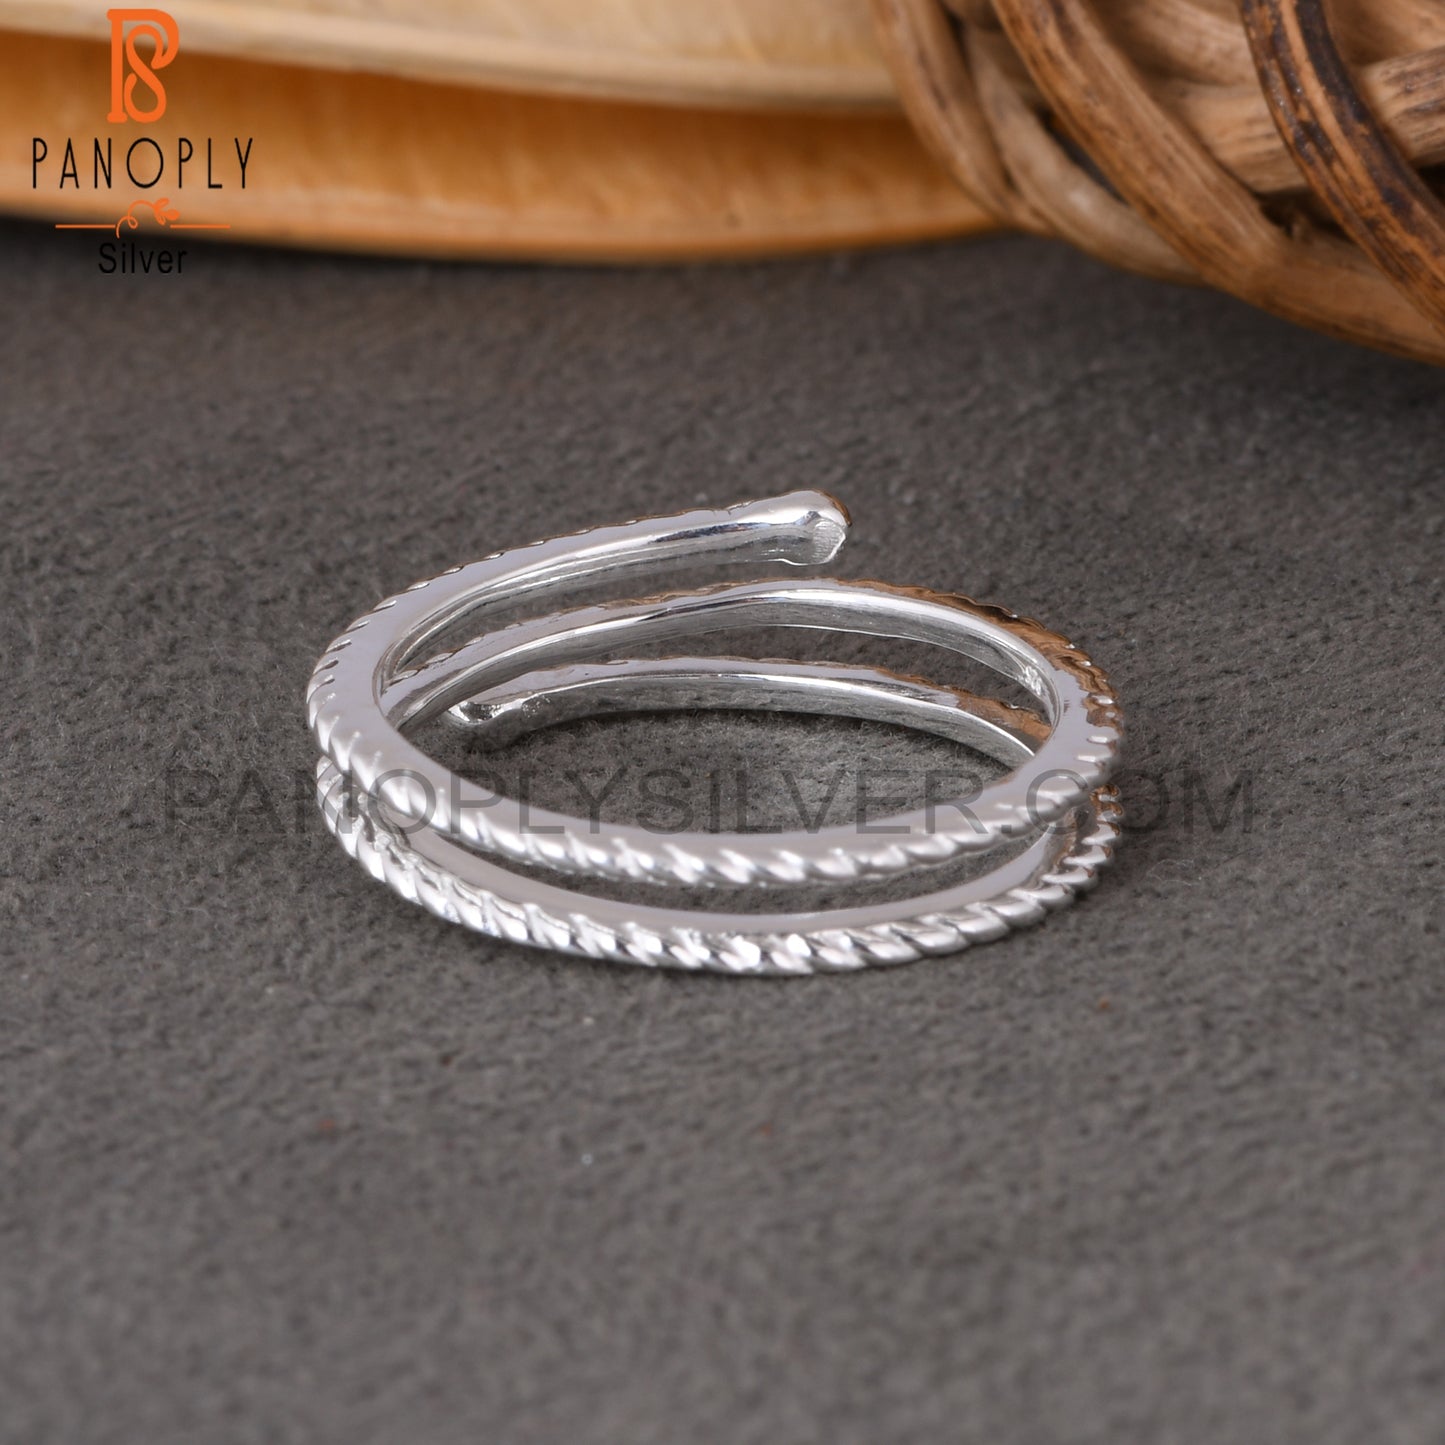 Triple Layer 925 Sterling Silver Ring